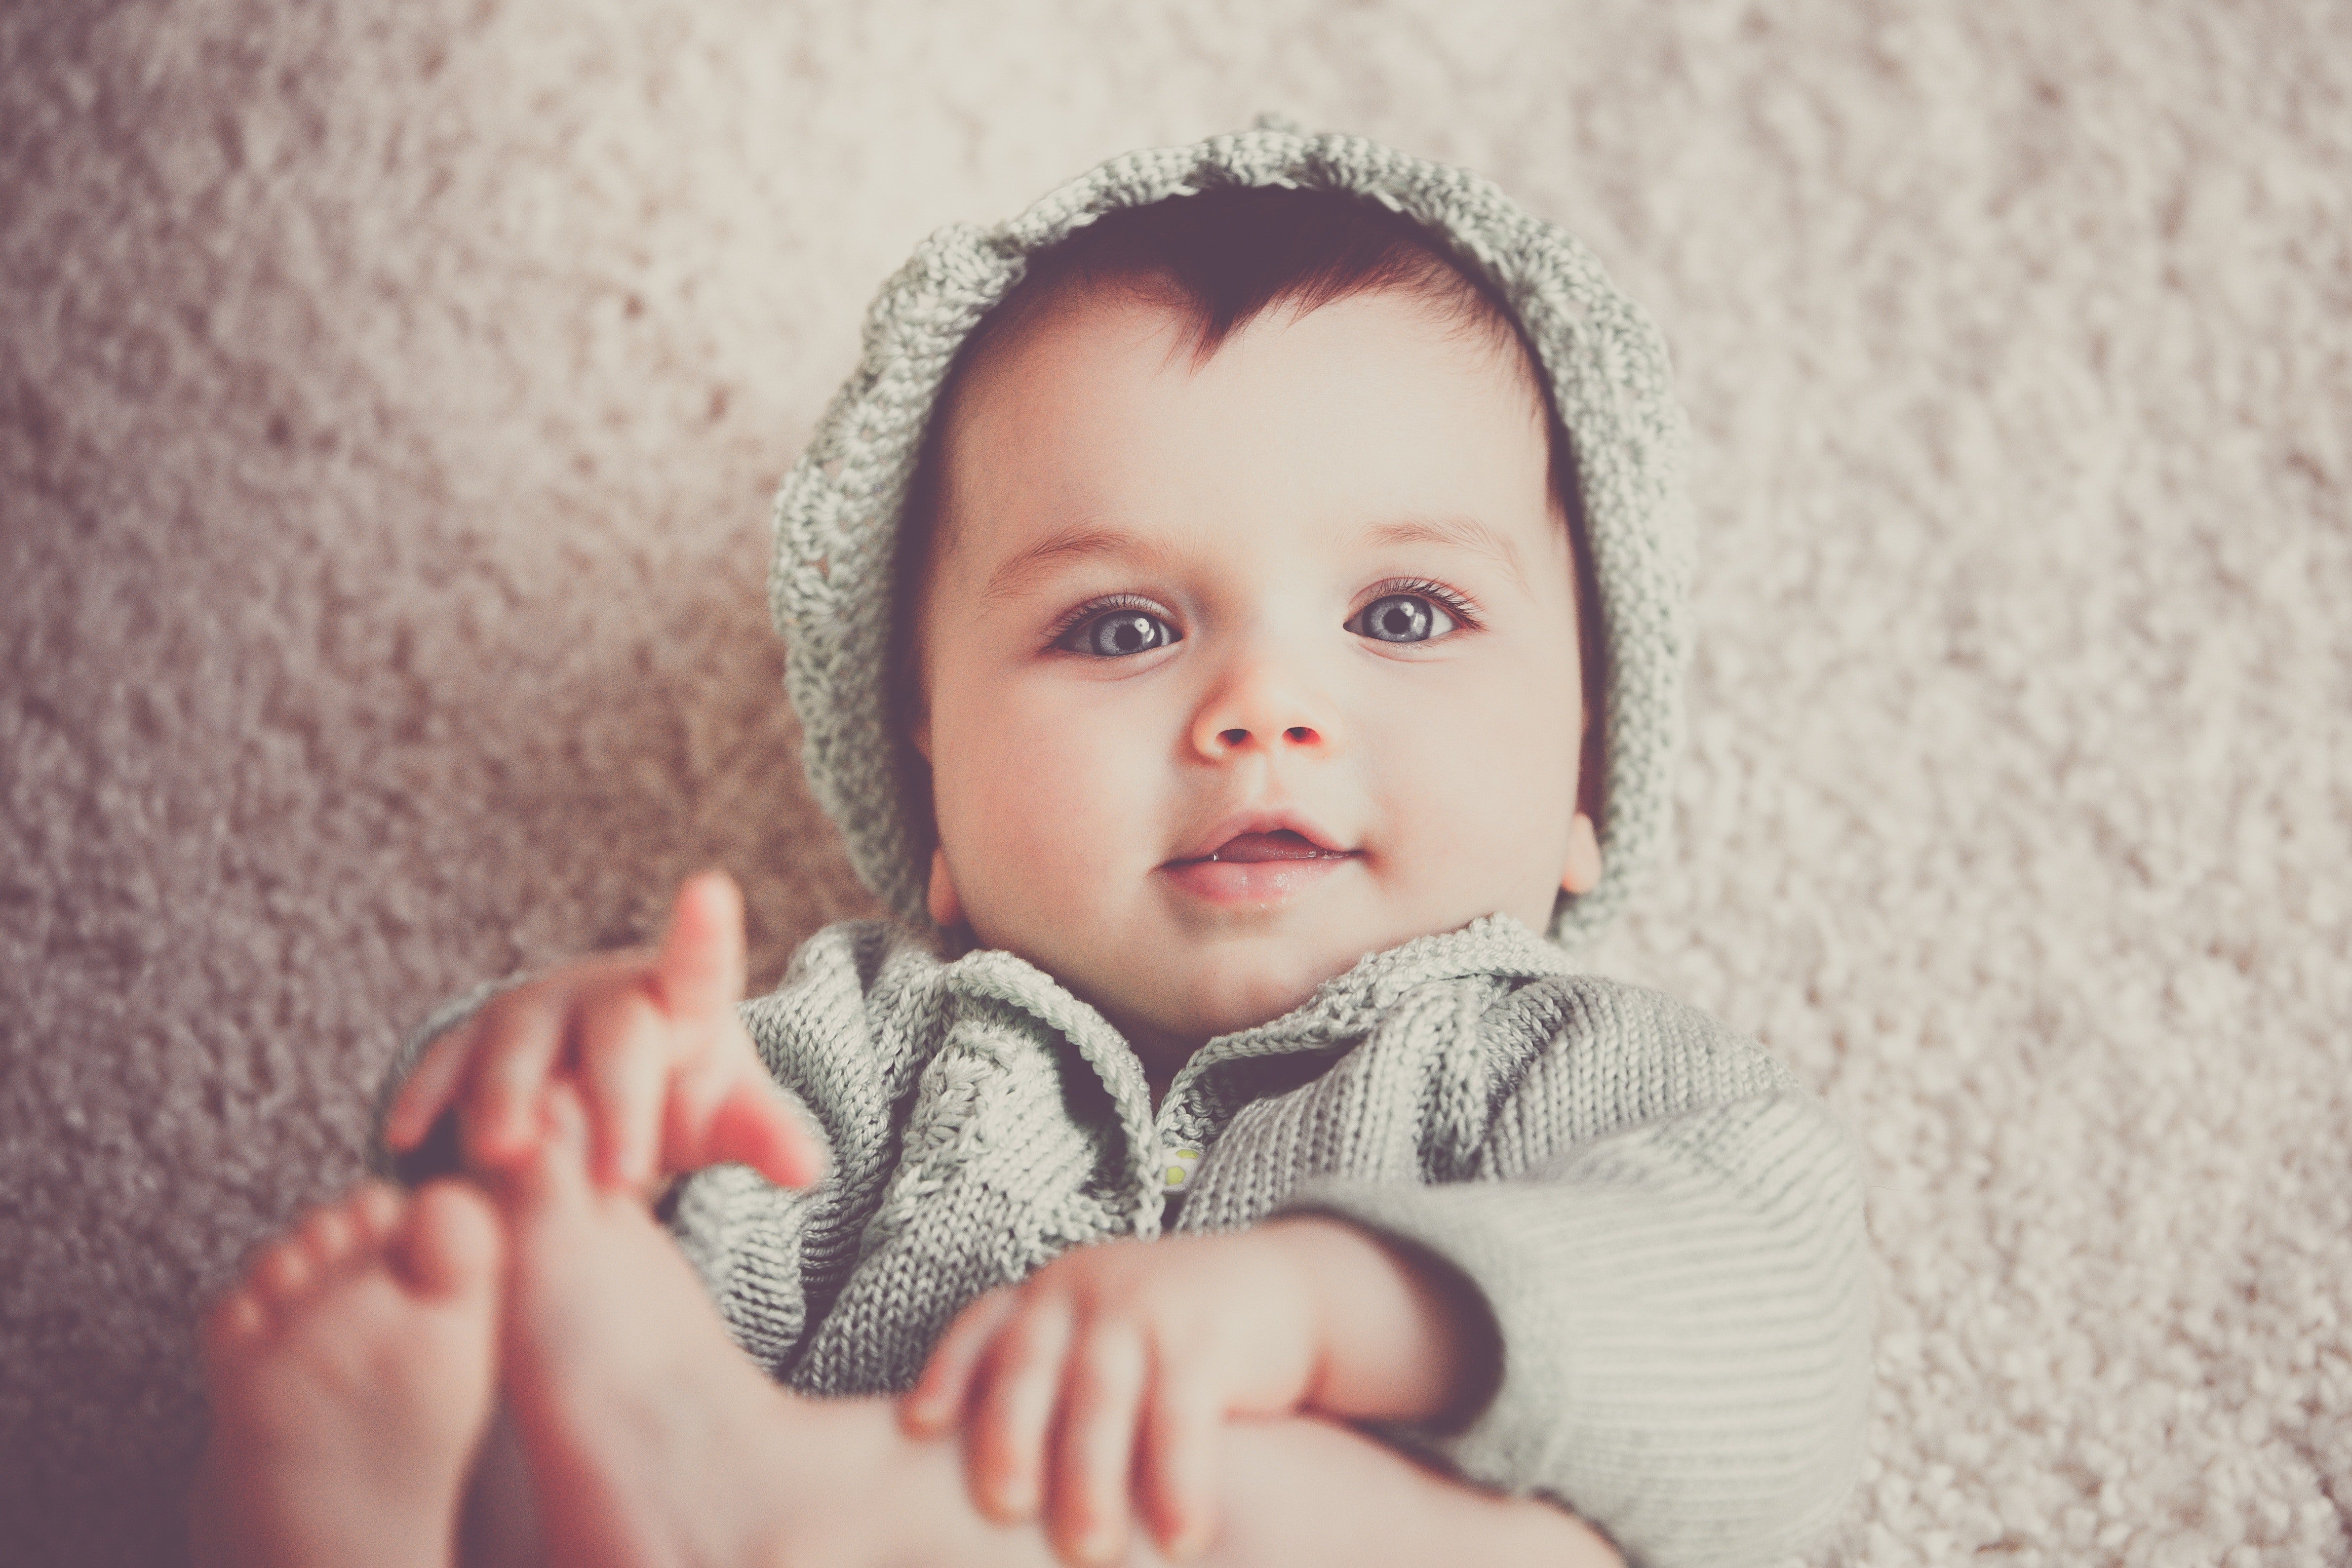 A lovely baby | Photo: Pexels